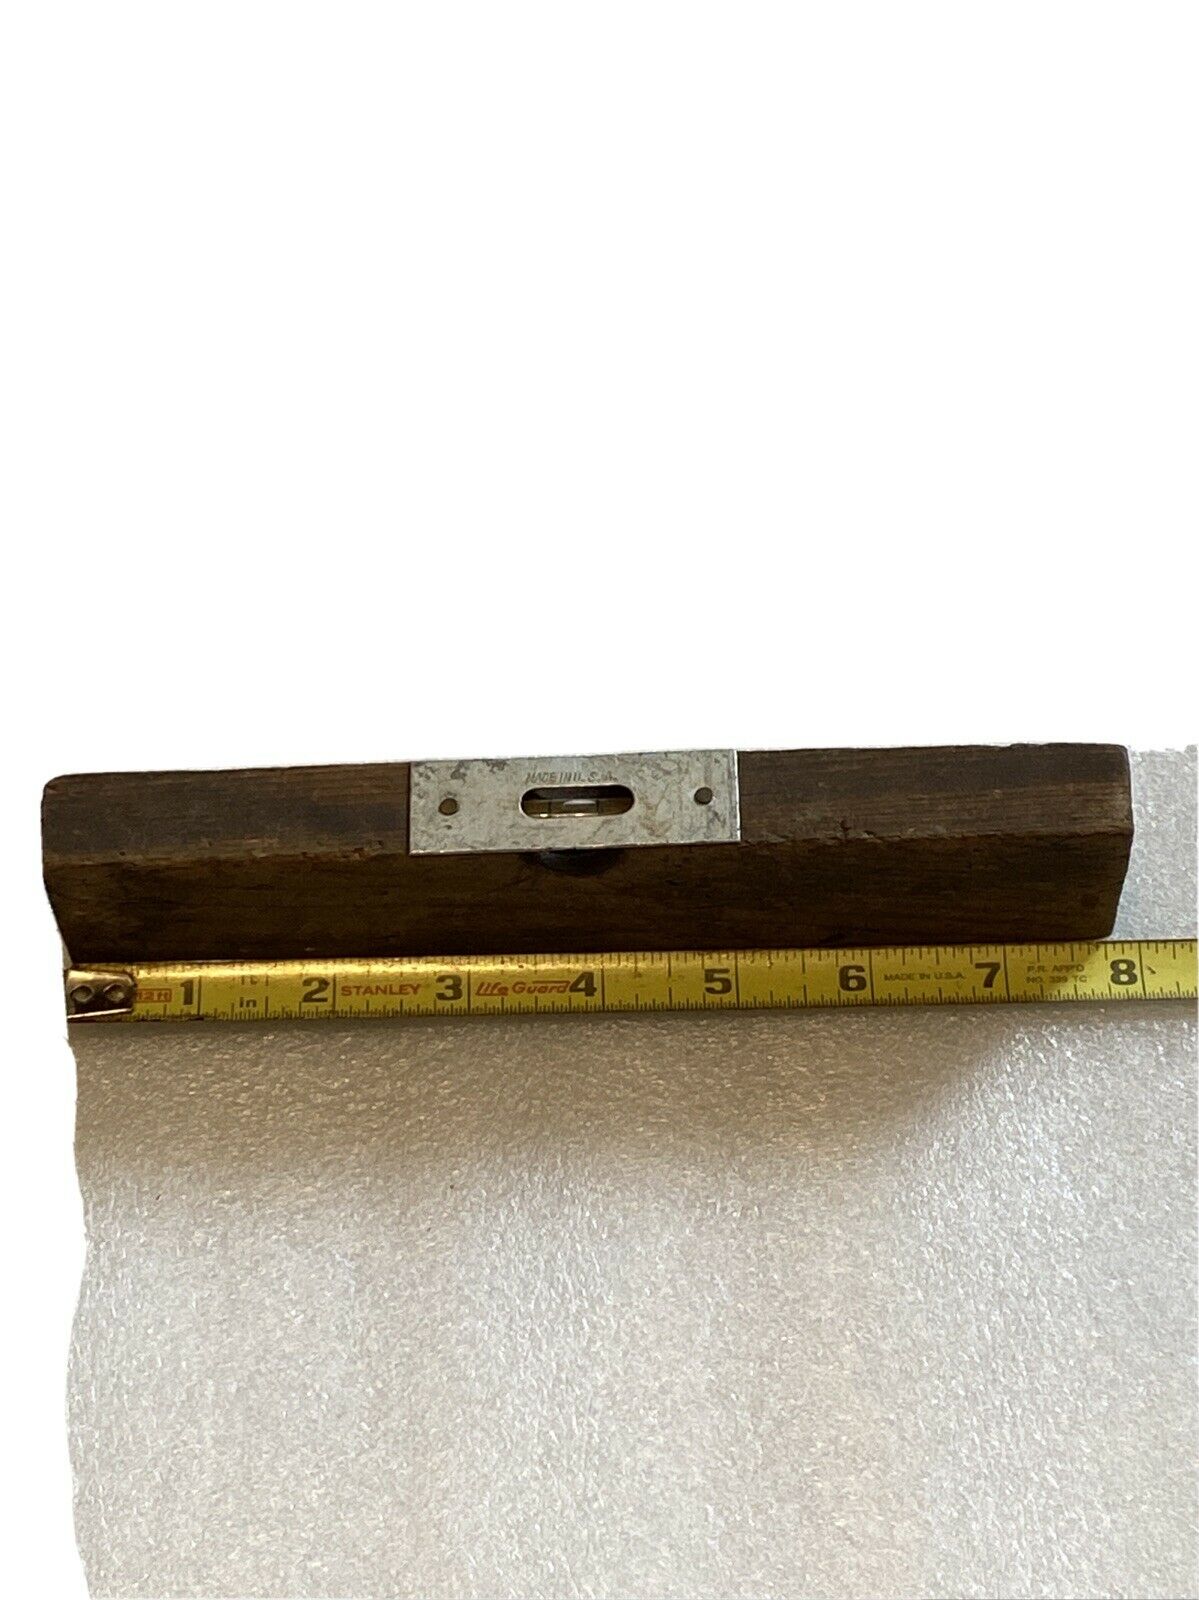 Vintage Wooden Level, No Brand Name Working Condition Usa Possibly Hand Made